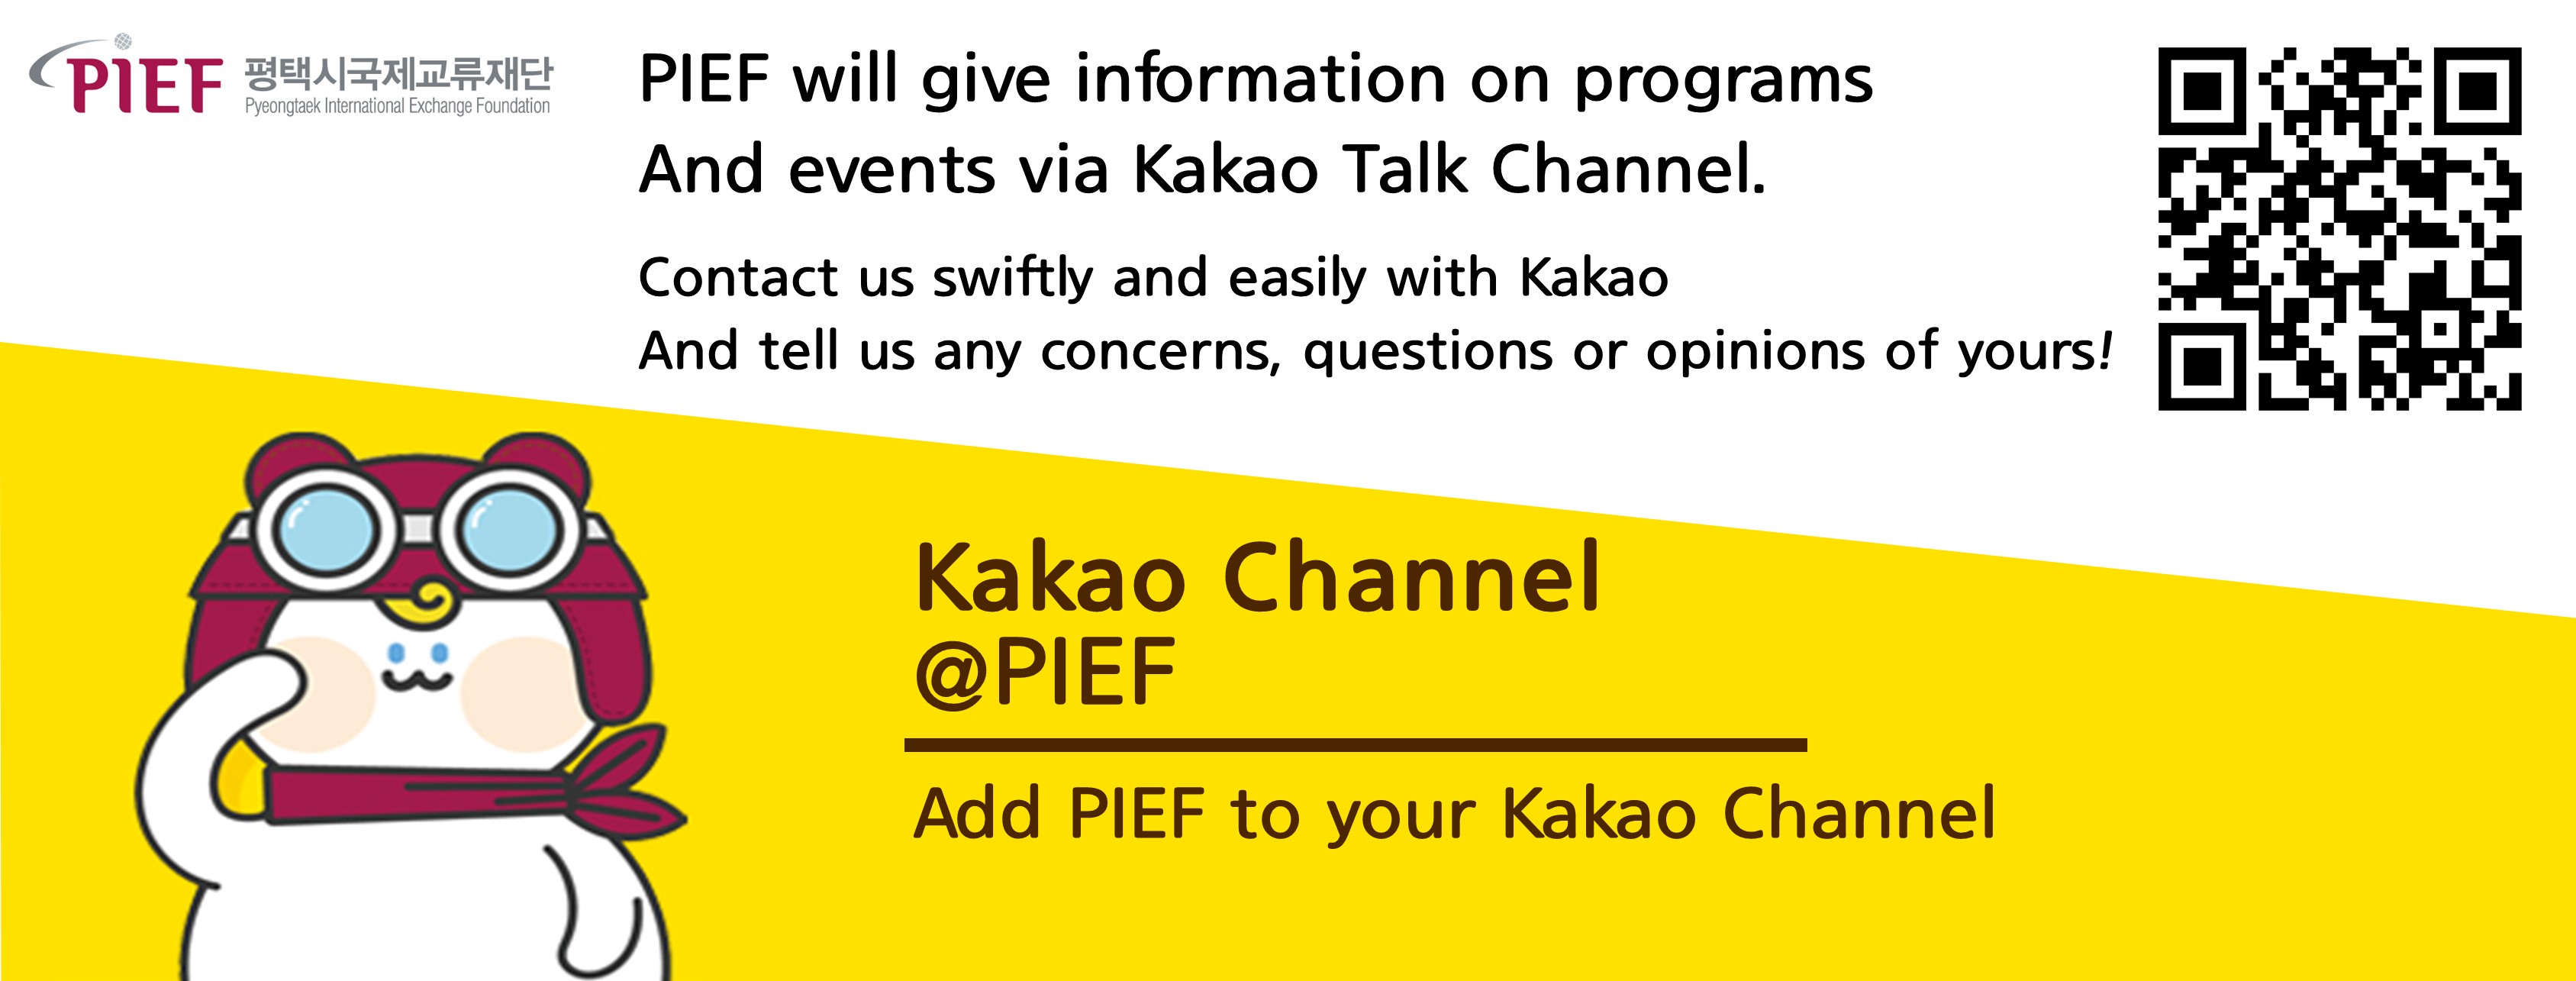 PIEF 평택시국제교류재단 Pyeongtaek International Exchange Foundation
PIEF will give information on programs An events via Kakao Talk Channel.
Contact us swiftly and easily with Kakao And tell us any concerns, questions or pinions of yours!
Kakao Channel @PIEF 
Add PIEF to your Kakao Channel